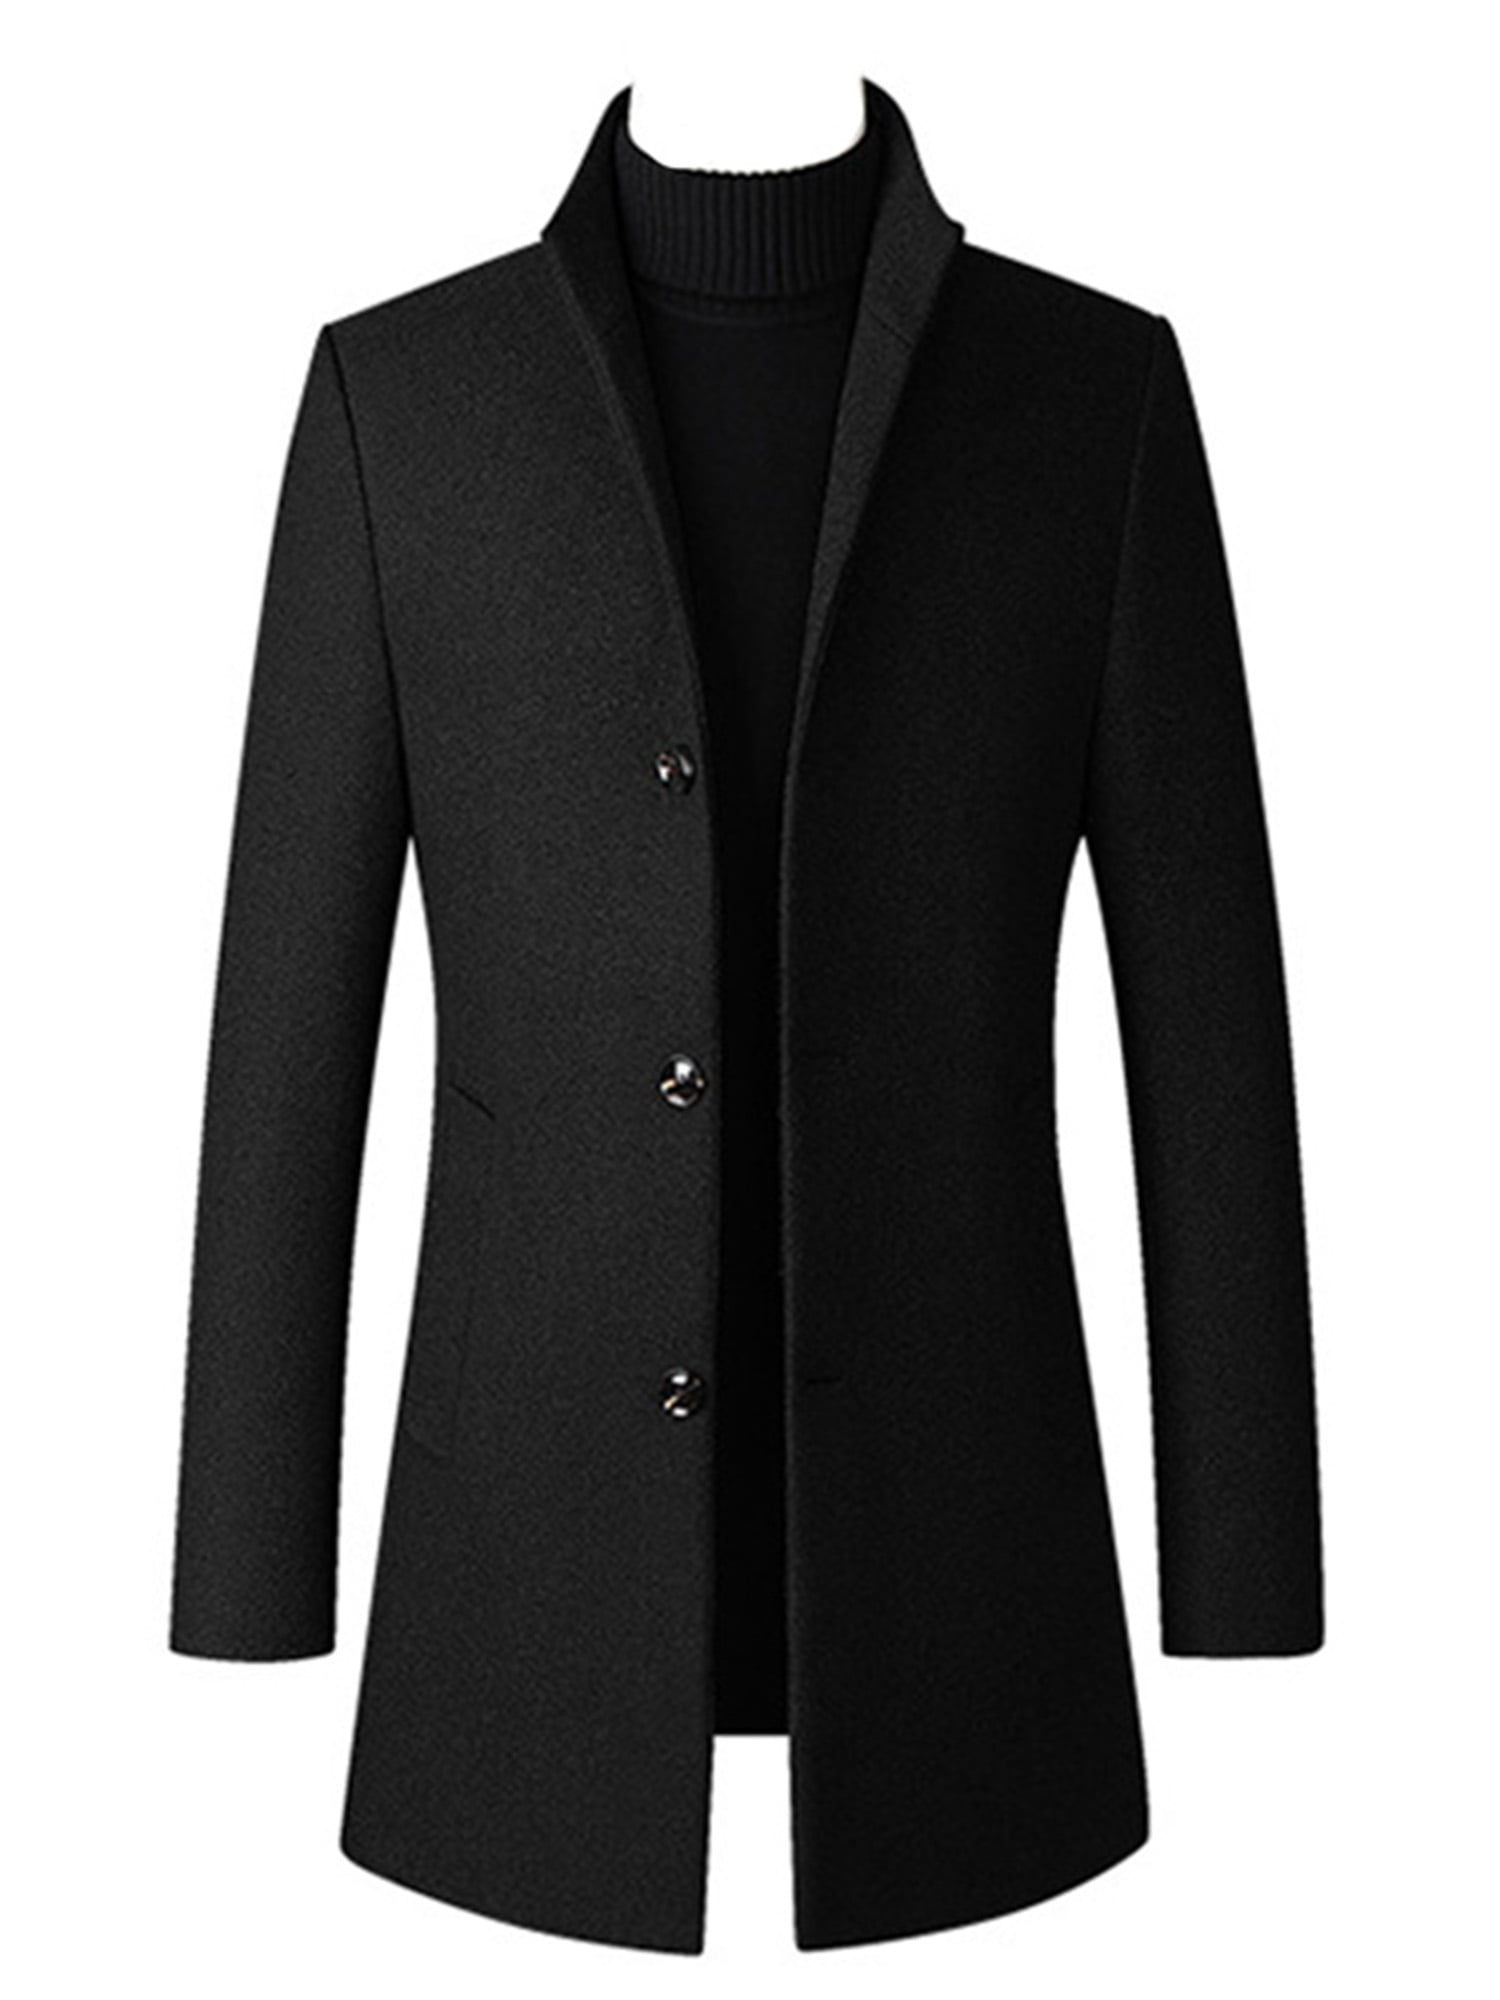 M-4XL Mens Winter Wool Blend Warm Trench Coat Jacket Single Breasted Peacoat Top